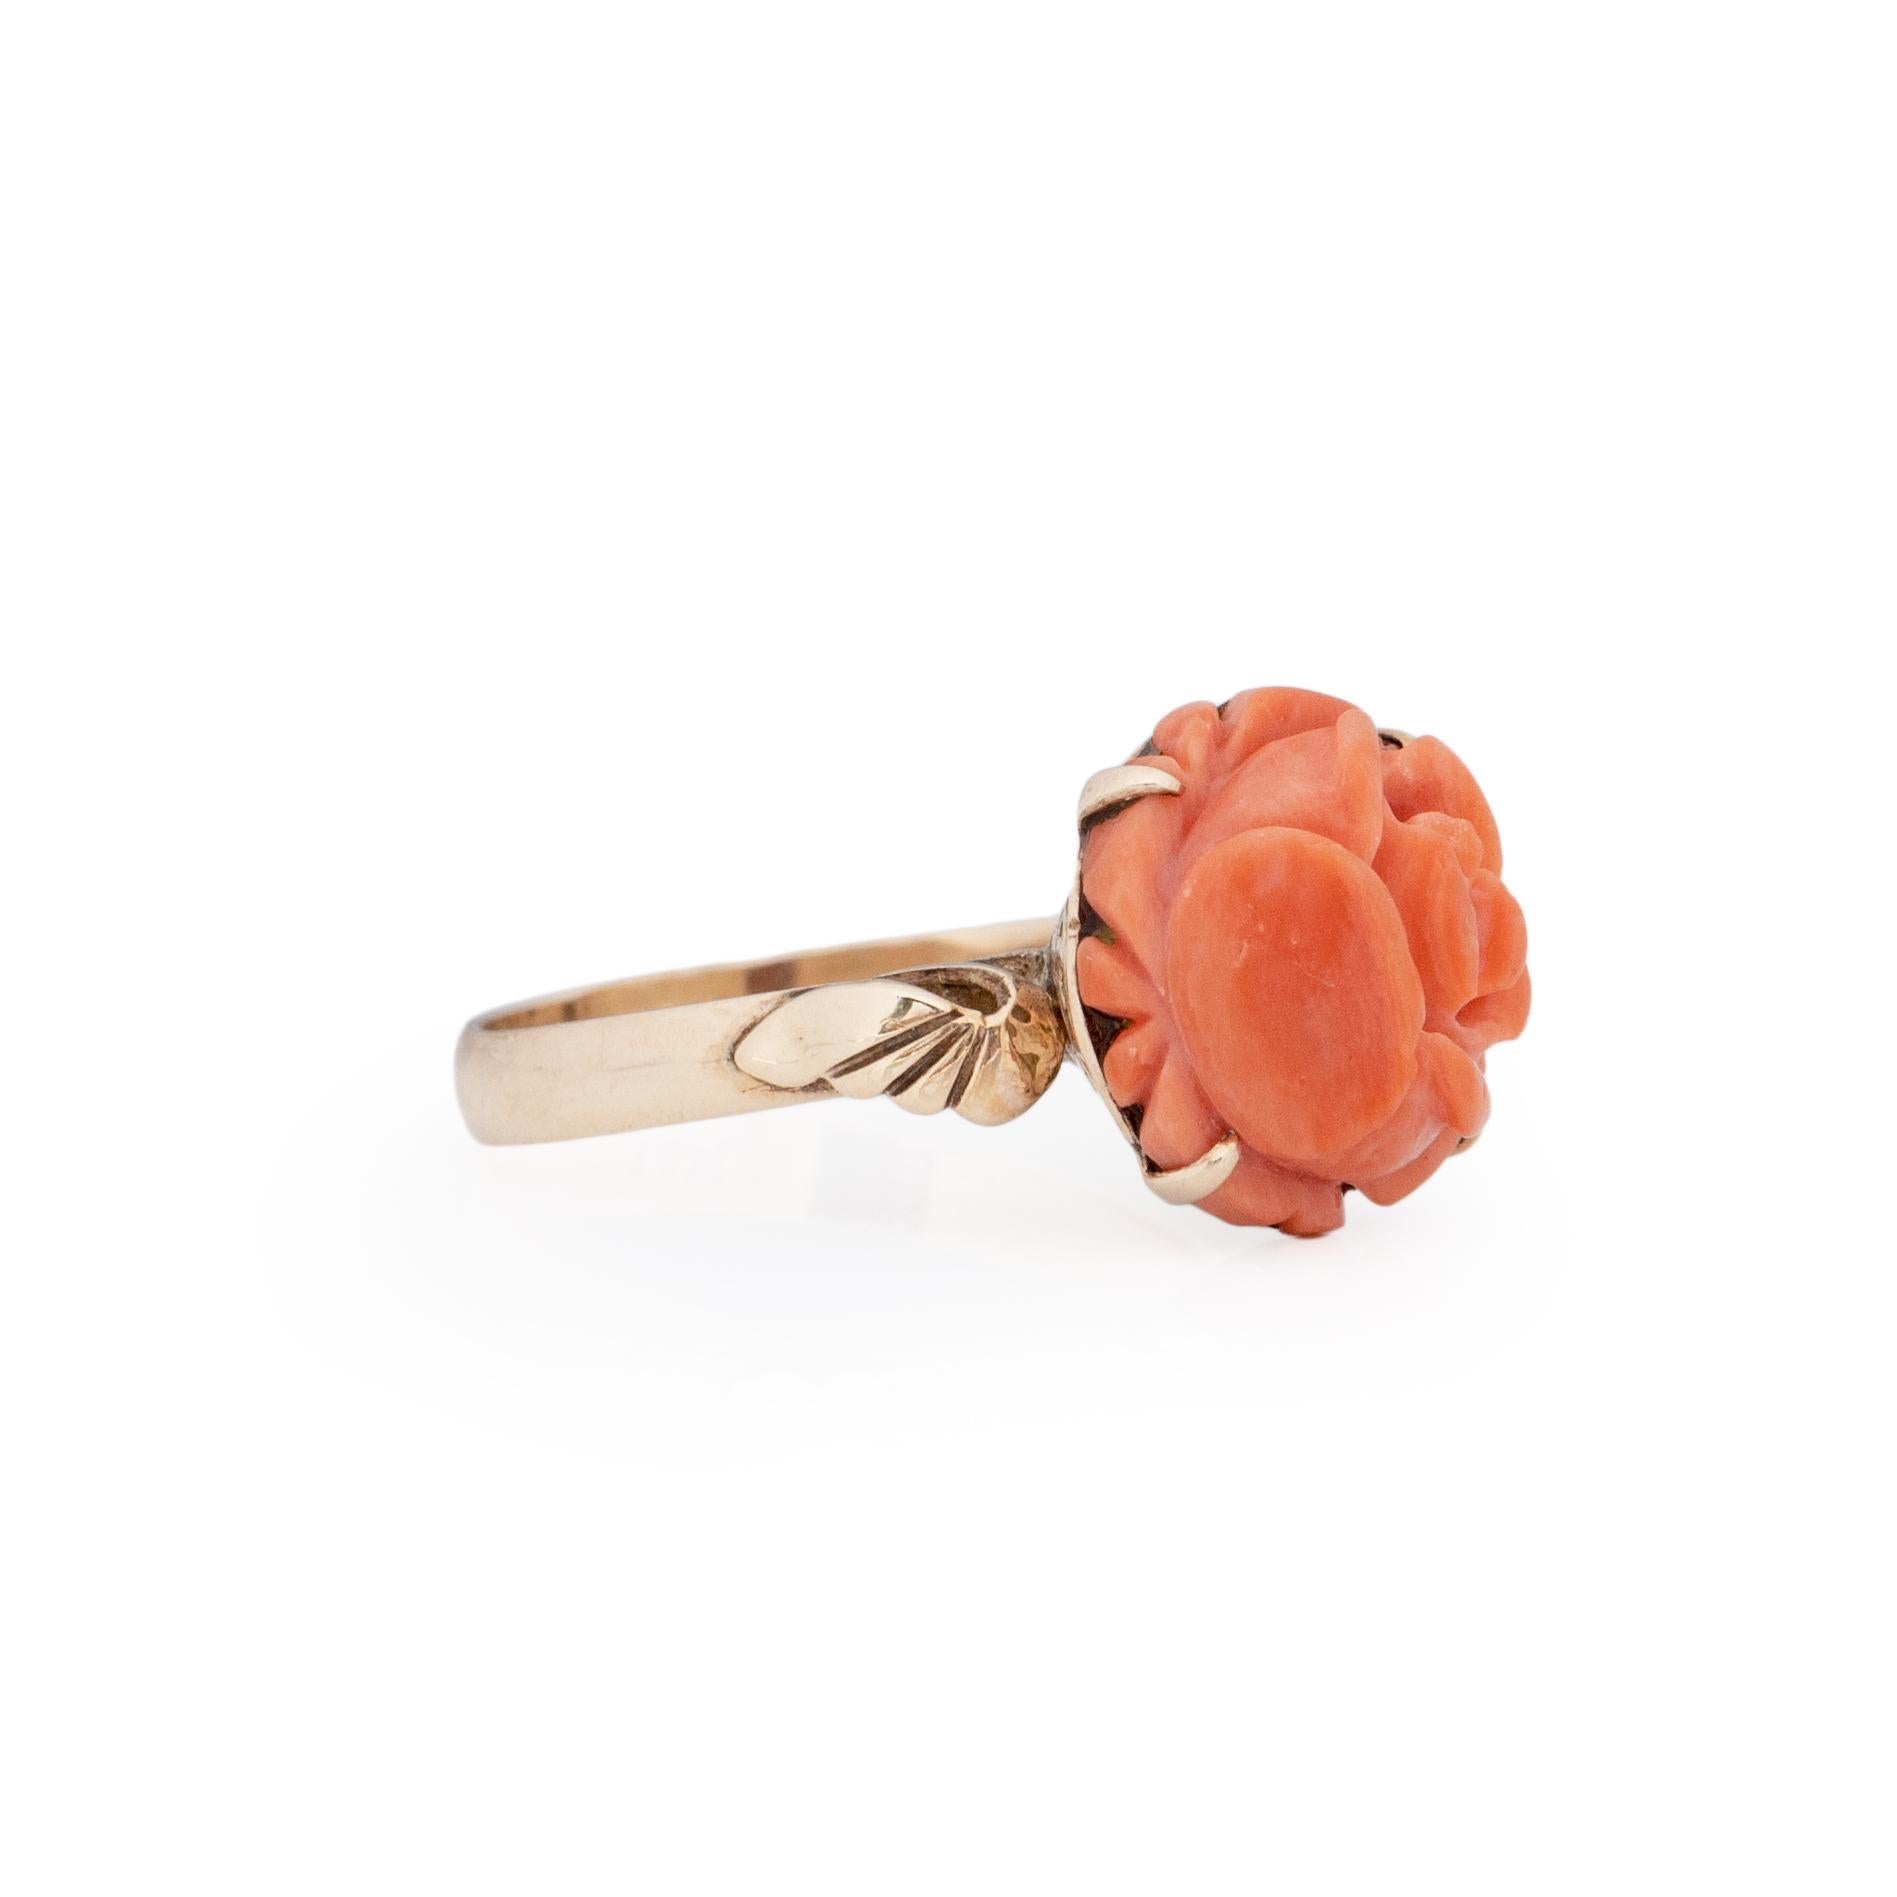 Looking for a flower that will never die? This unique treasure is perfectly hand made. Crafted in 14K yellow gold from the leaf details on the shoulders, to the scroll work in the gallery. This peachy colored coral rose is a work of art. The hue of